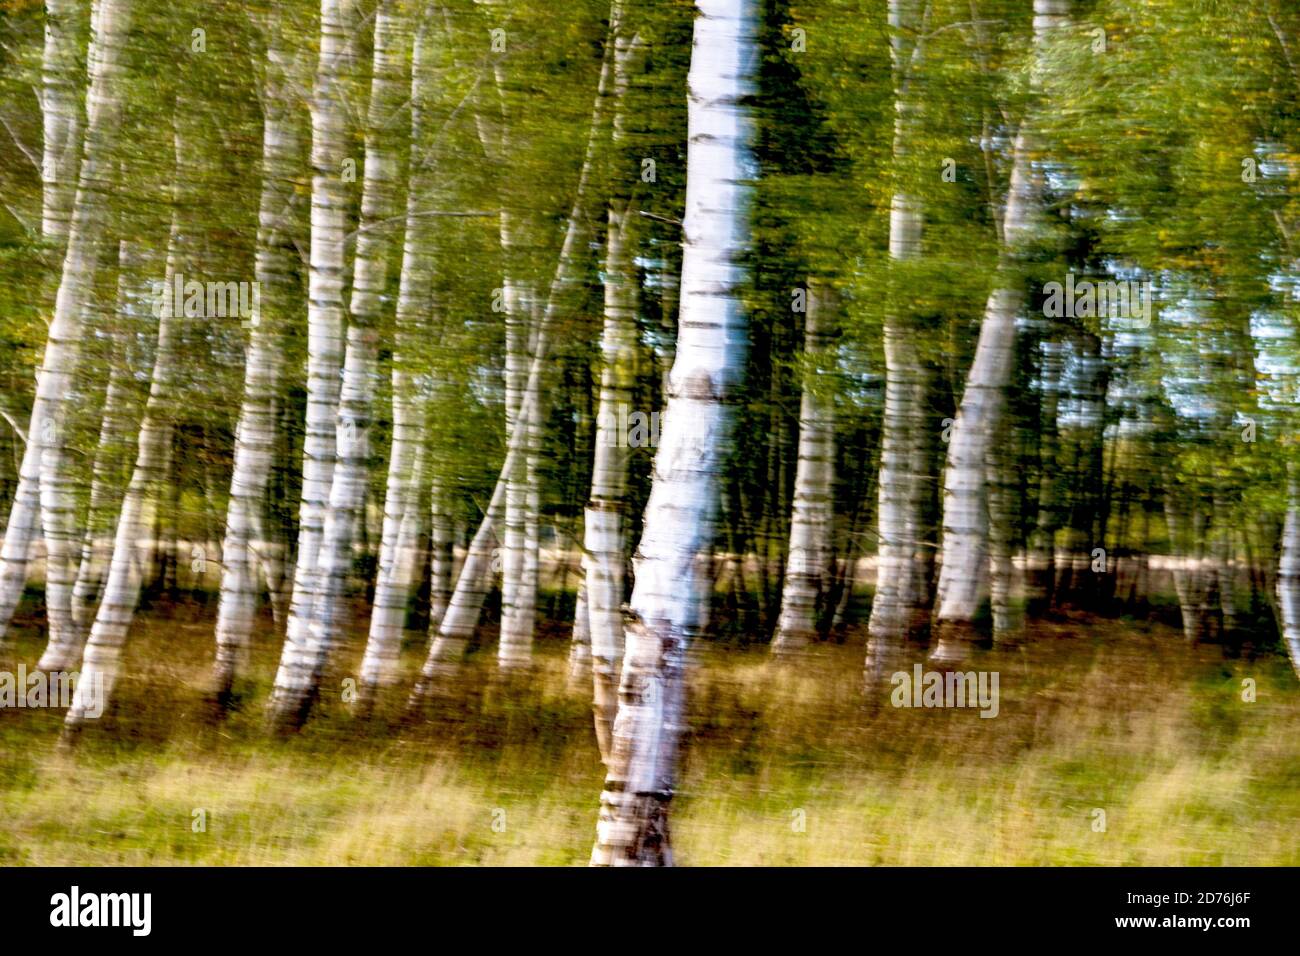 Landscape with beautiful white birch trees in Germany Stock Photo